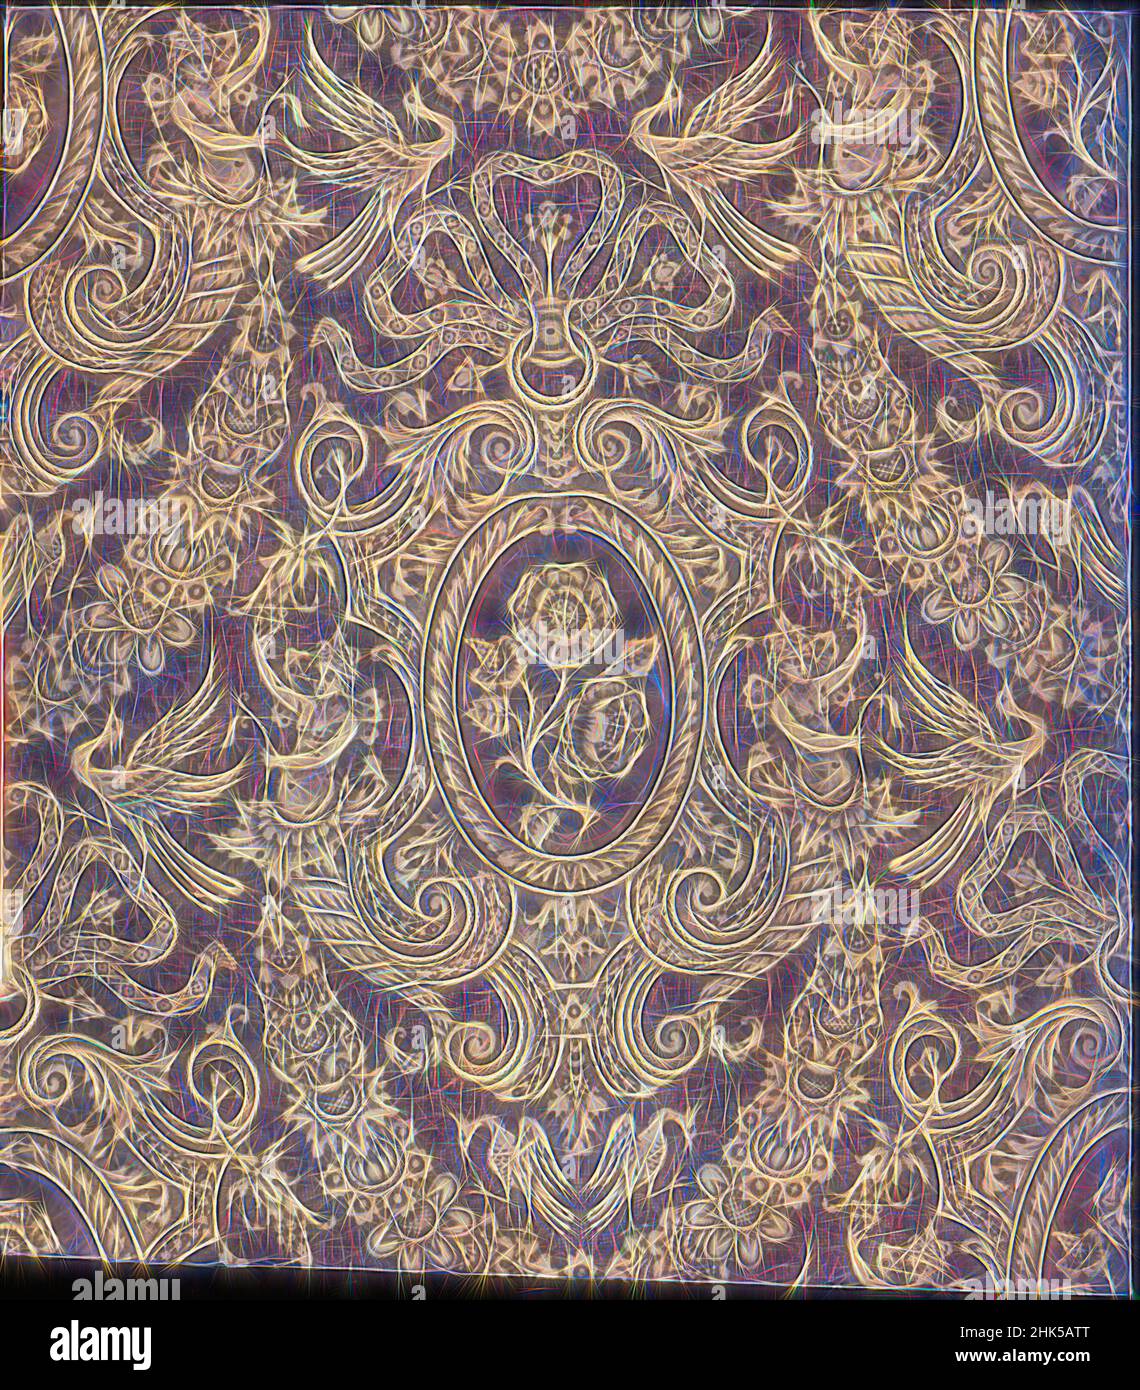 Inspired by Wallpaper, Paper, ca. 1890, 24 1/2 x 19 3/4 in., 62.2 x 50.2 cm, Reimagined by Artotop. Classic art reinvented with a modern twist. Design of warm cheerful glowing of brightness and light ray radiance. Photography inspired by surrealism and futurism, embracing dynamic energy of modern technology, movement, speed and revolutionize culture Stock Photo